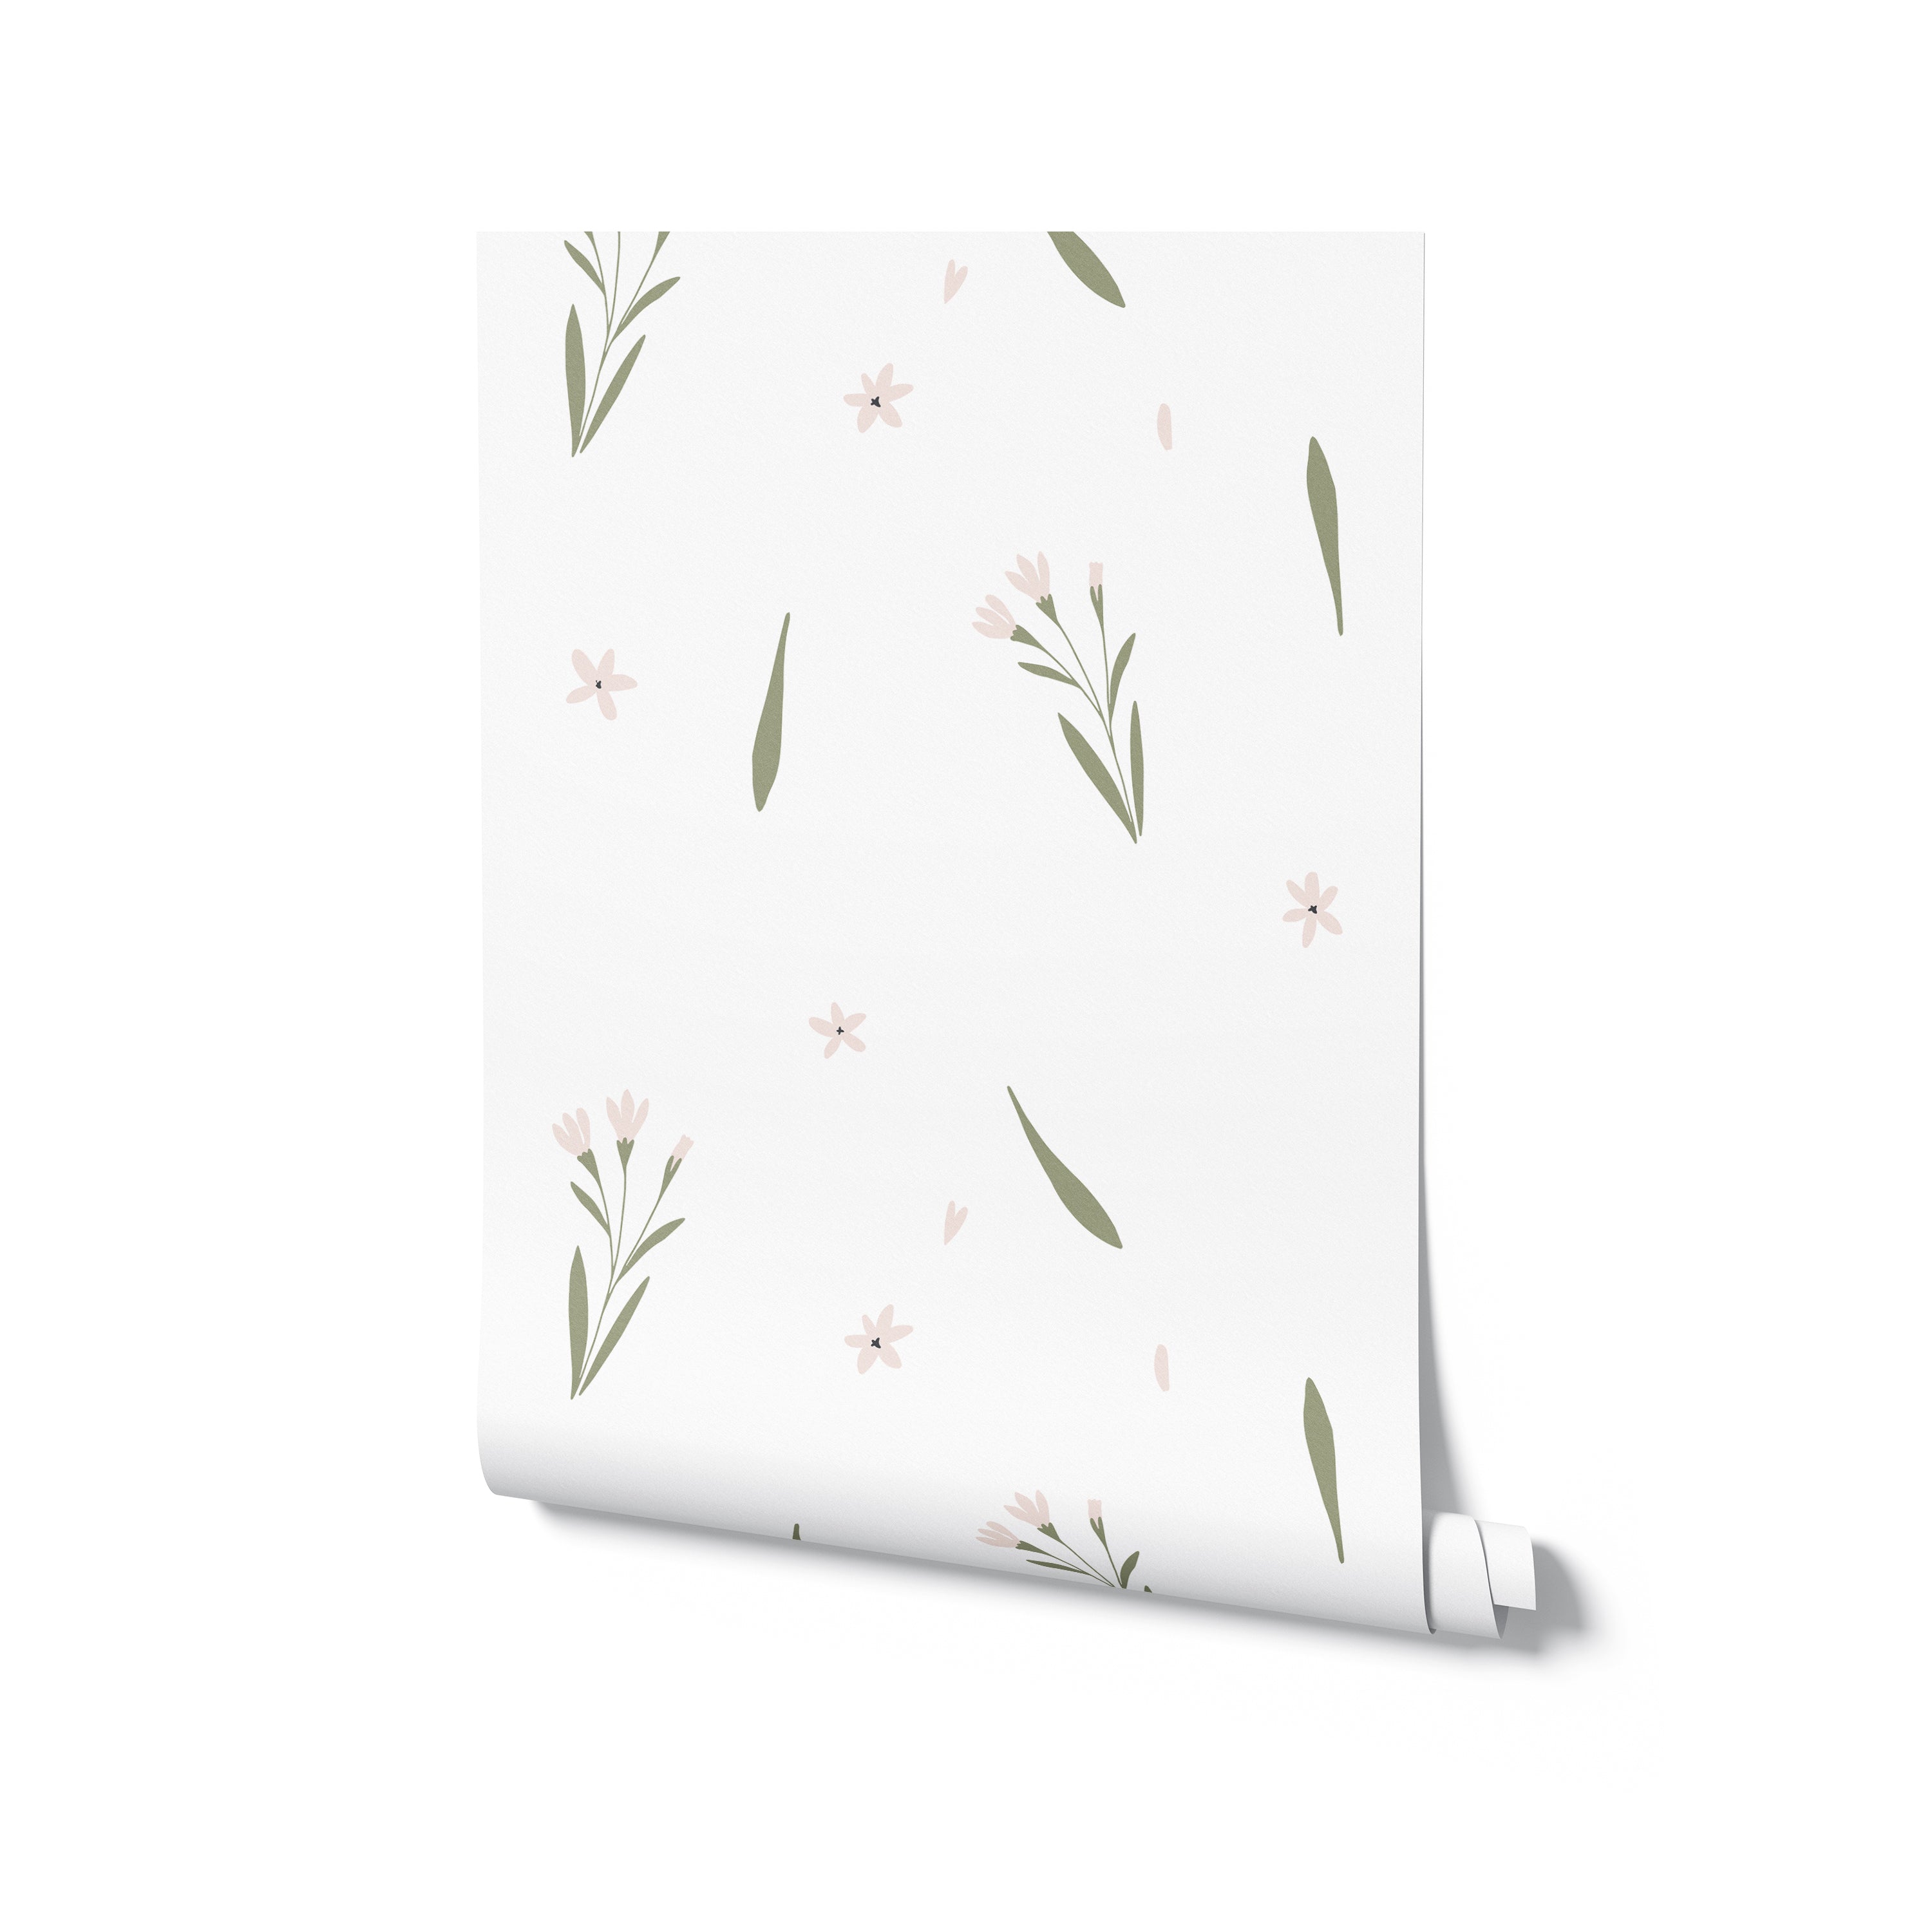 Rolled sample of Summer Market Wallpaper featuring a charming array of small pink flowers and green leaves on a white background, perfect for adding a touch of springtime freshness to any interior.